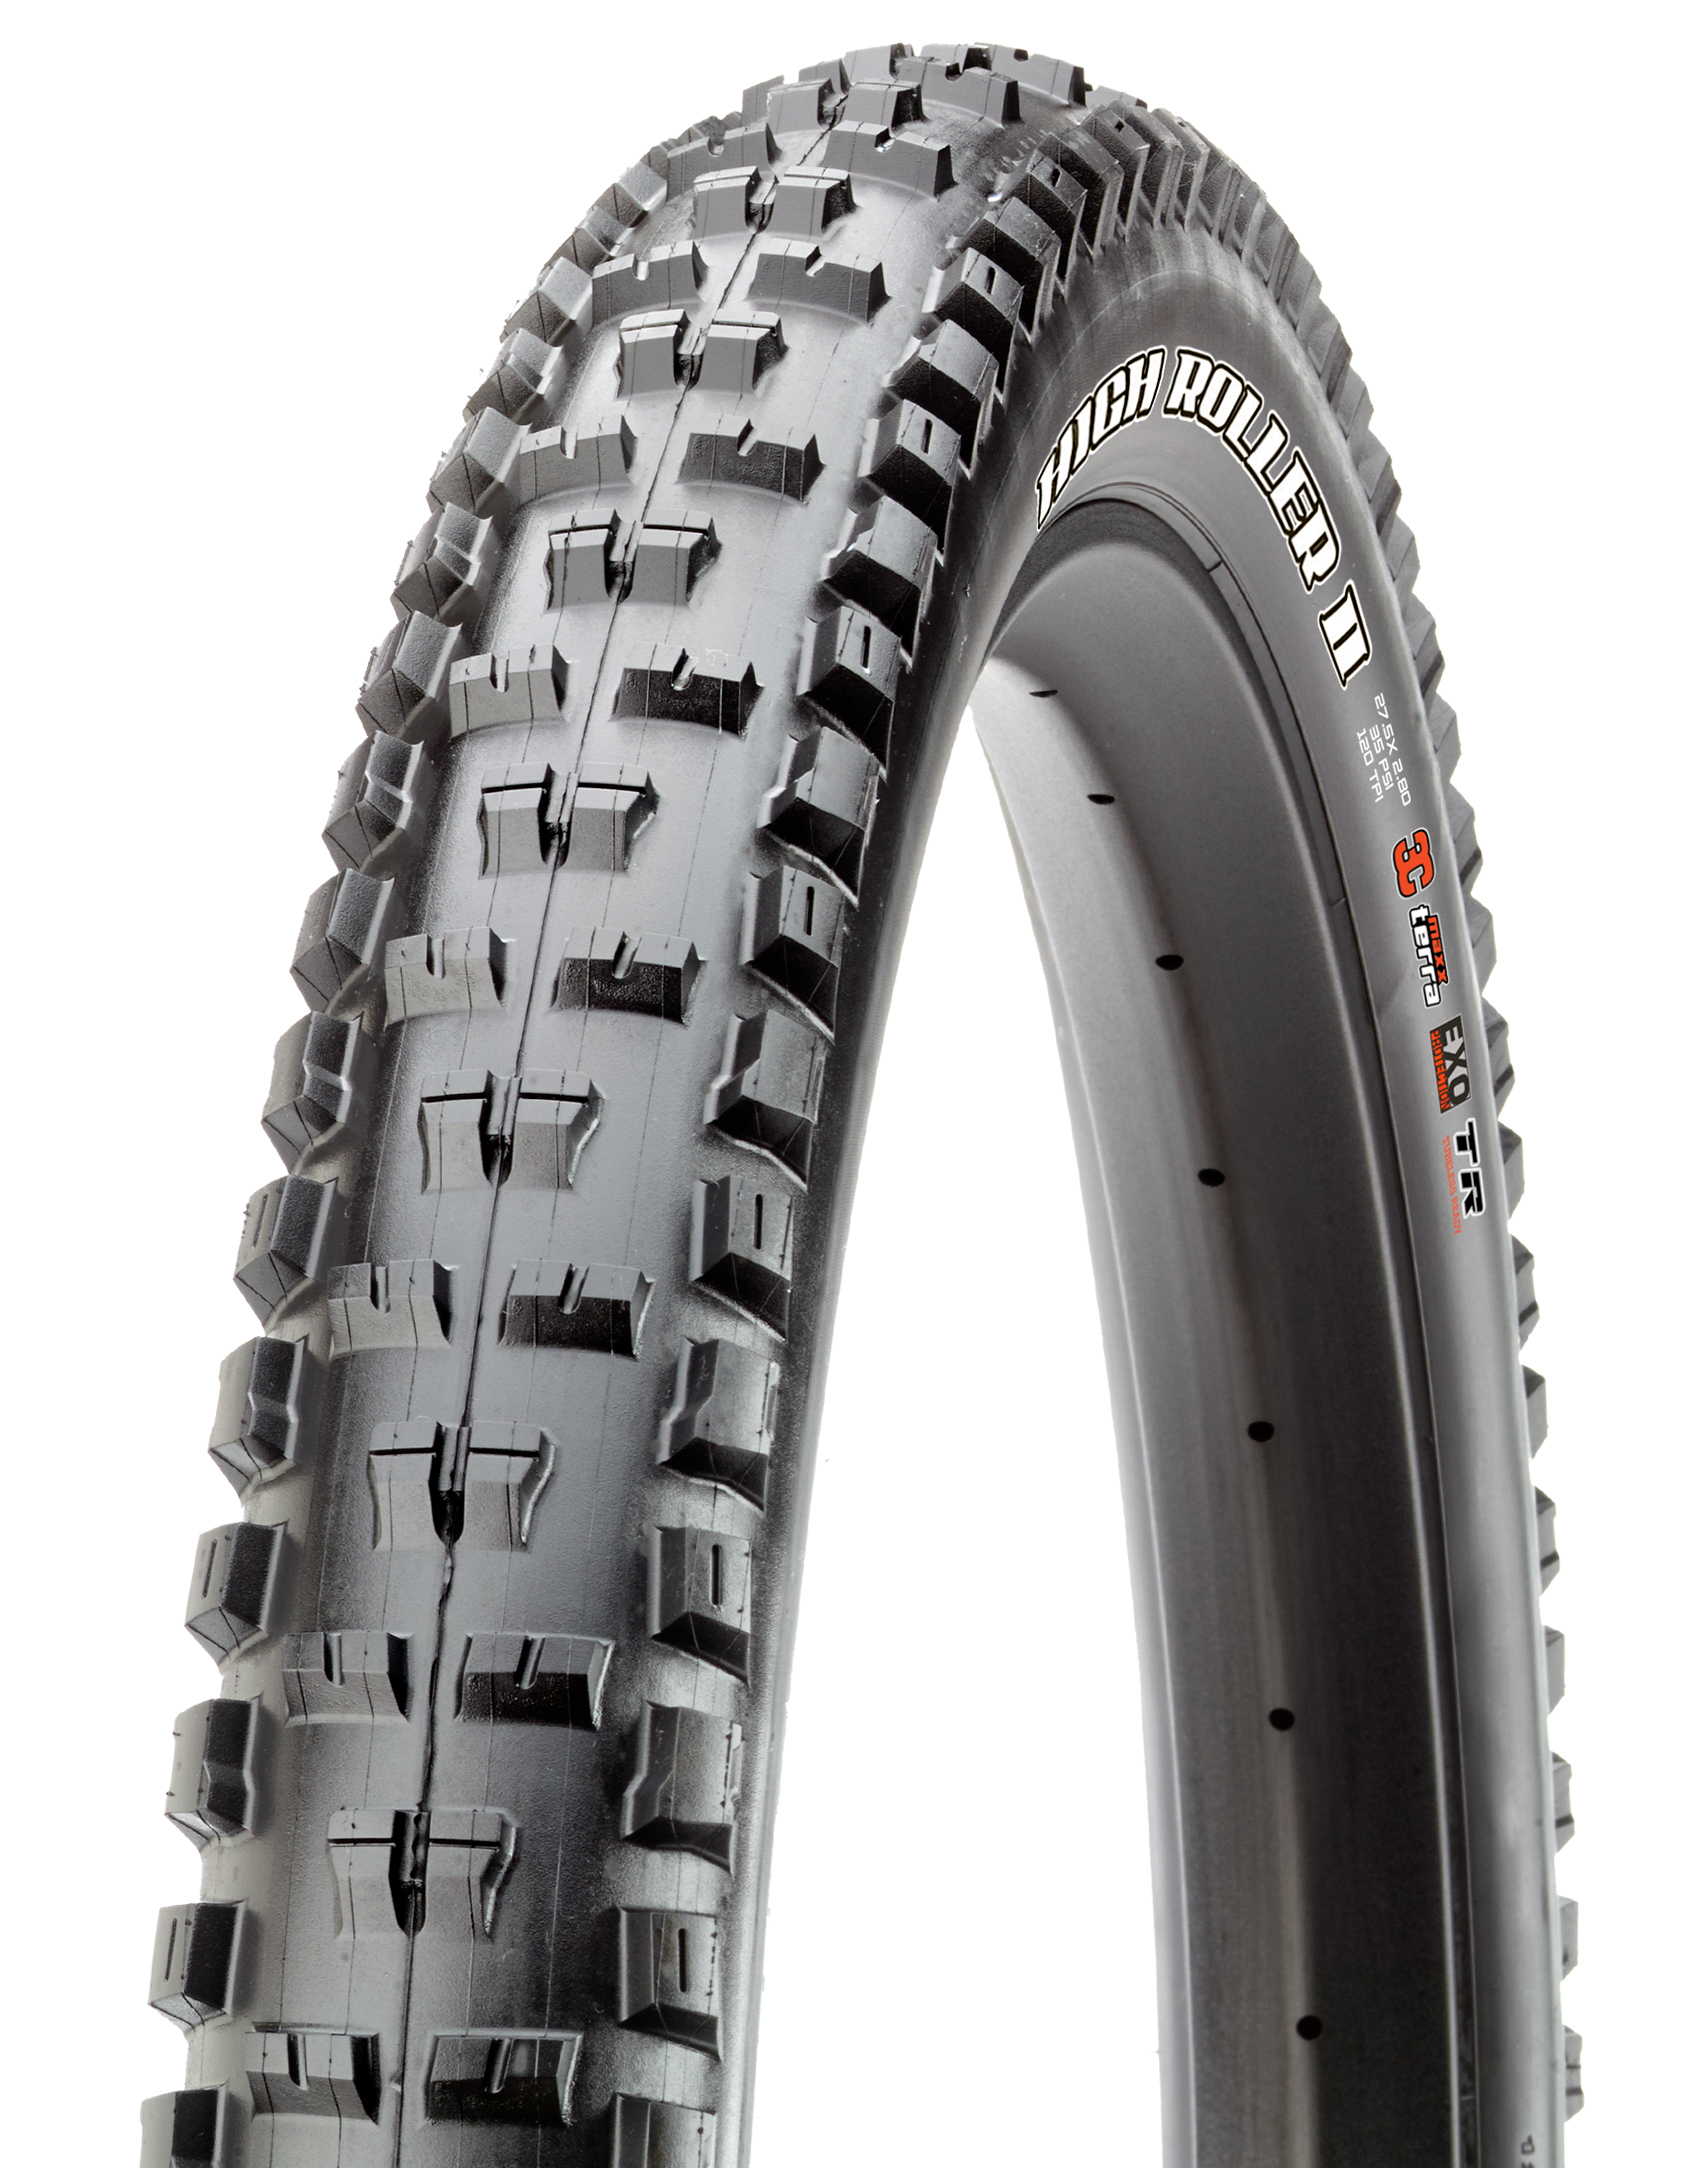 Anvelopa maxxis high roller ii 60tpi foldabil exo/tr plus tire 27.5x2.80